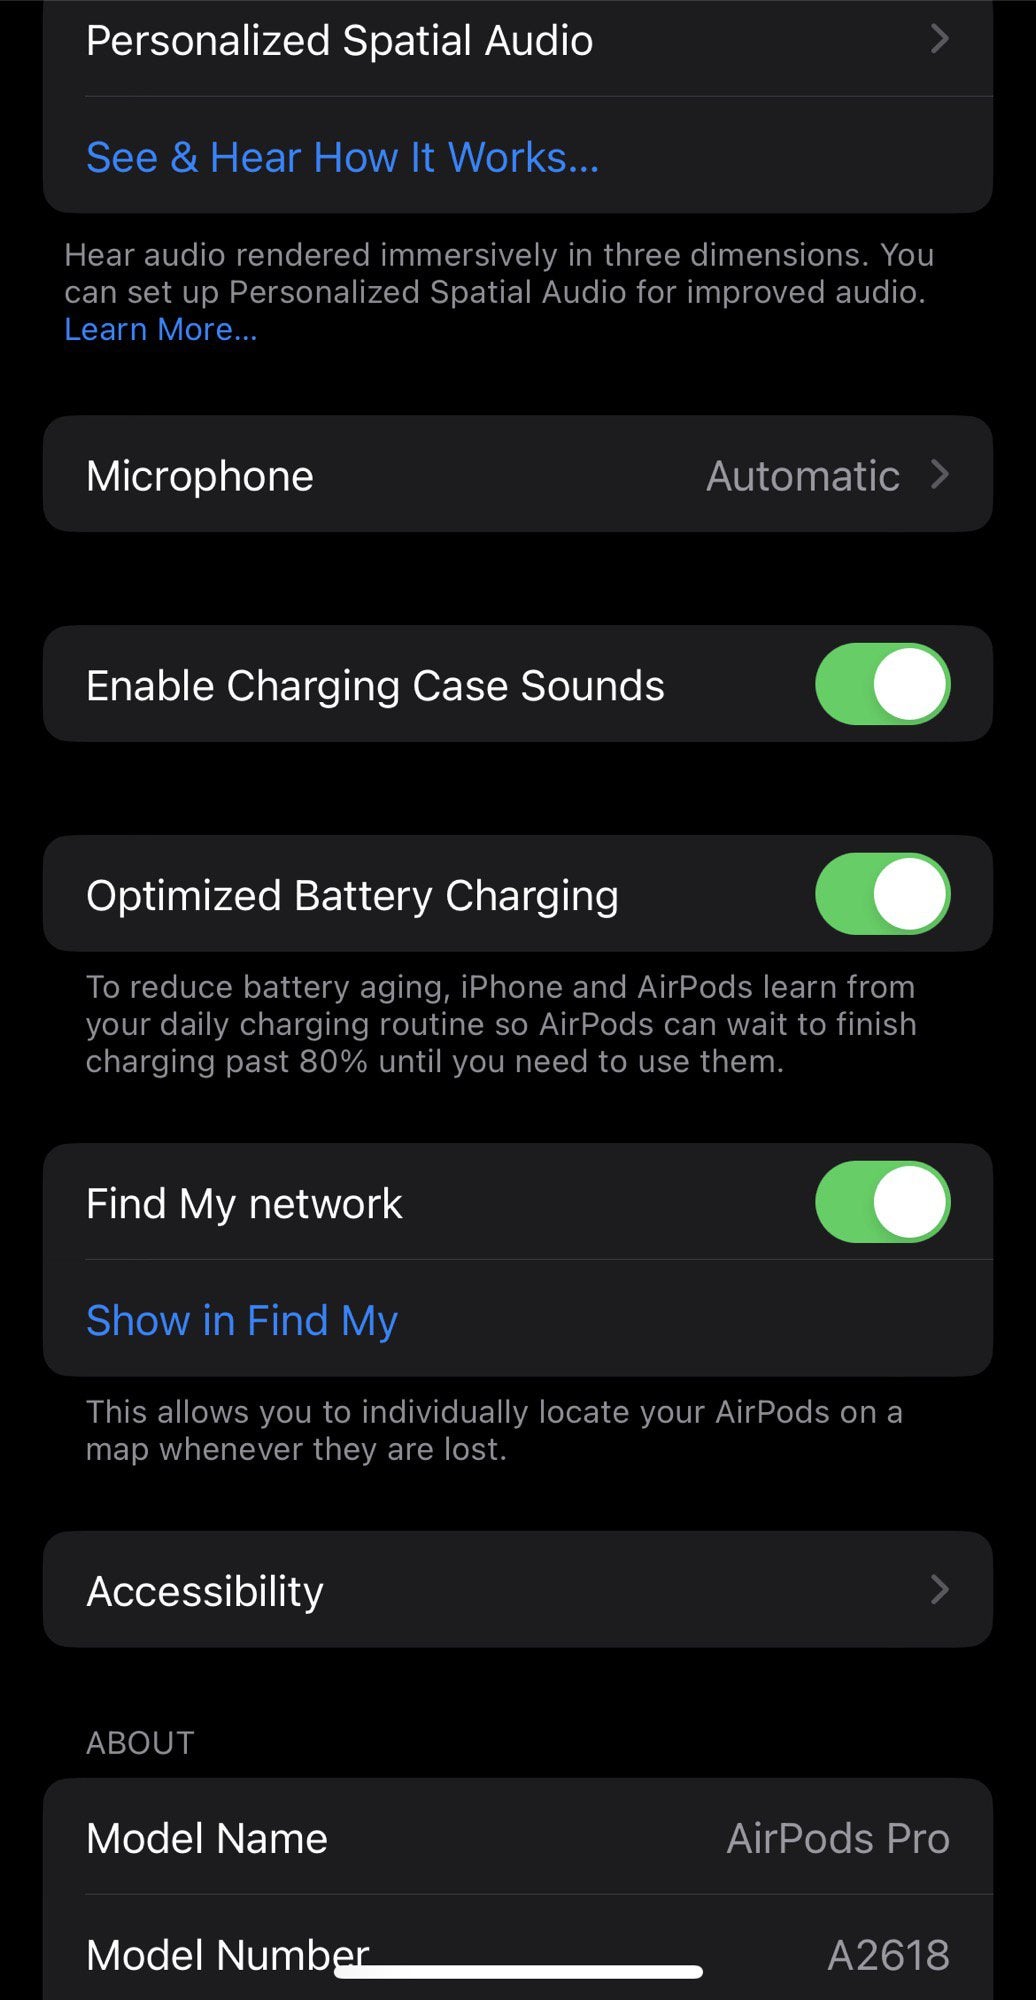 psa:-you-can-change-the-notifications-volume-of-airpods-pro-2nd-gen